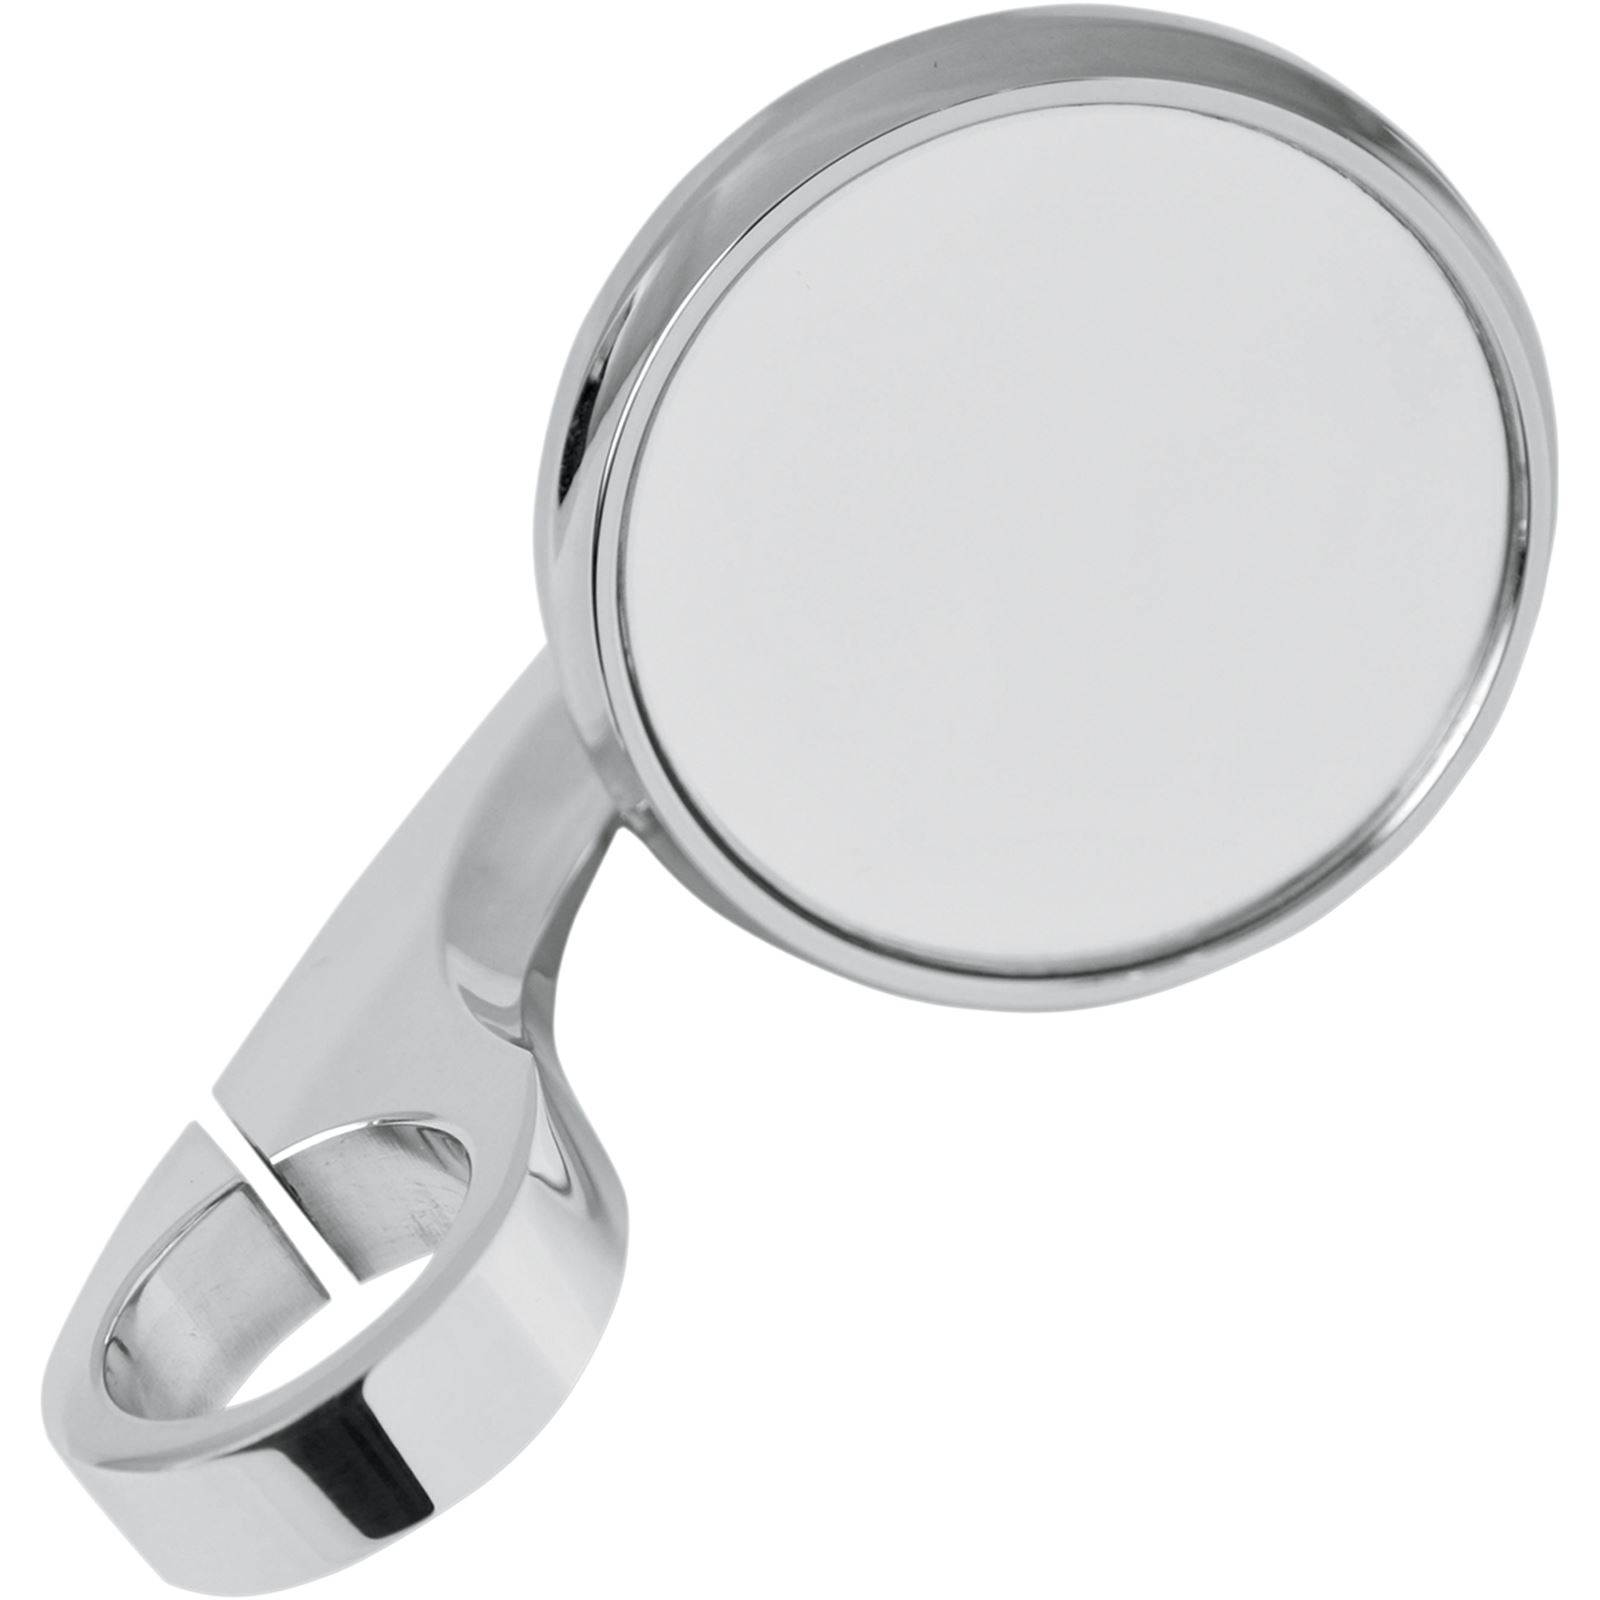 Todds Cycle Shooter Mirror 1.25" Chrome